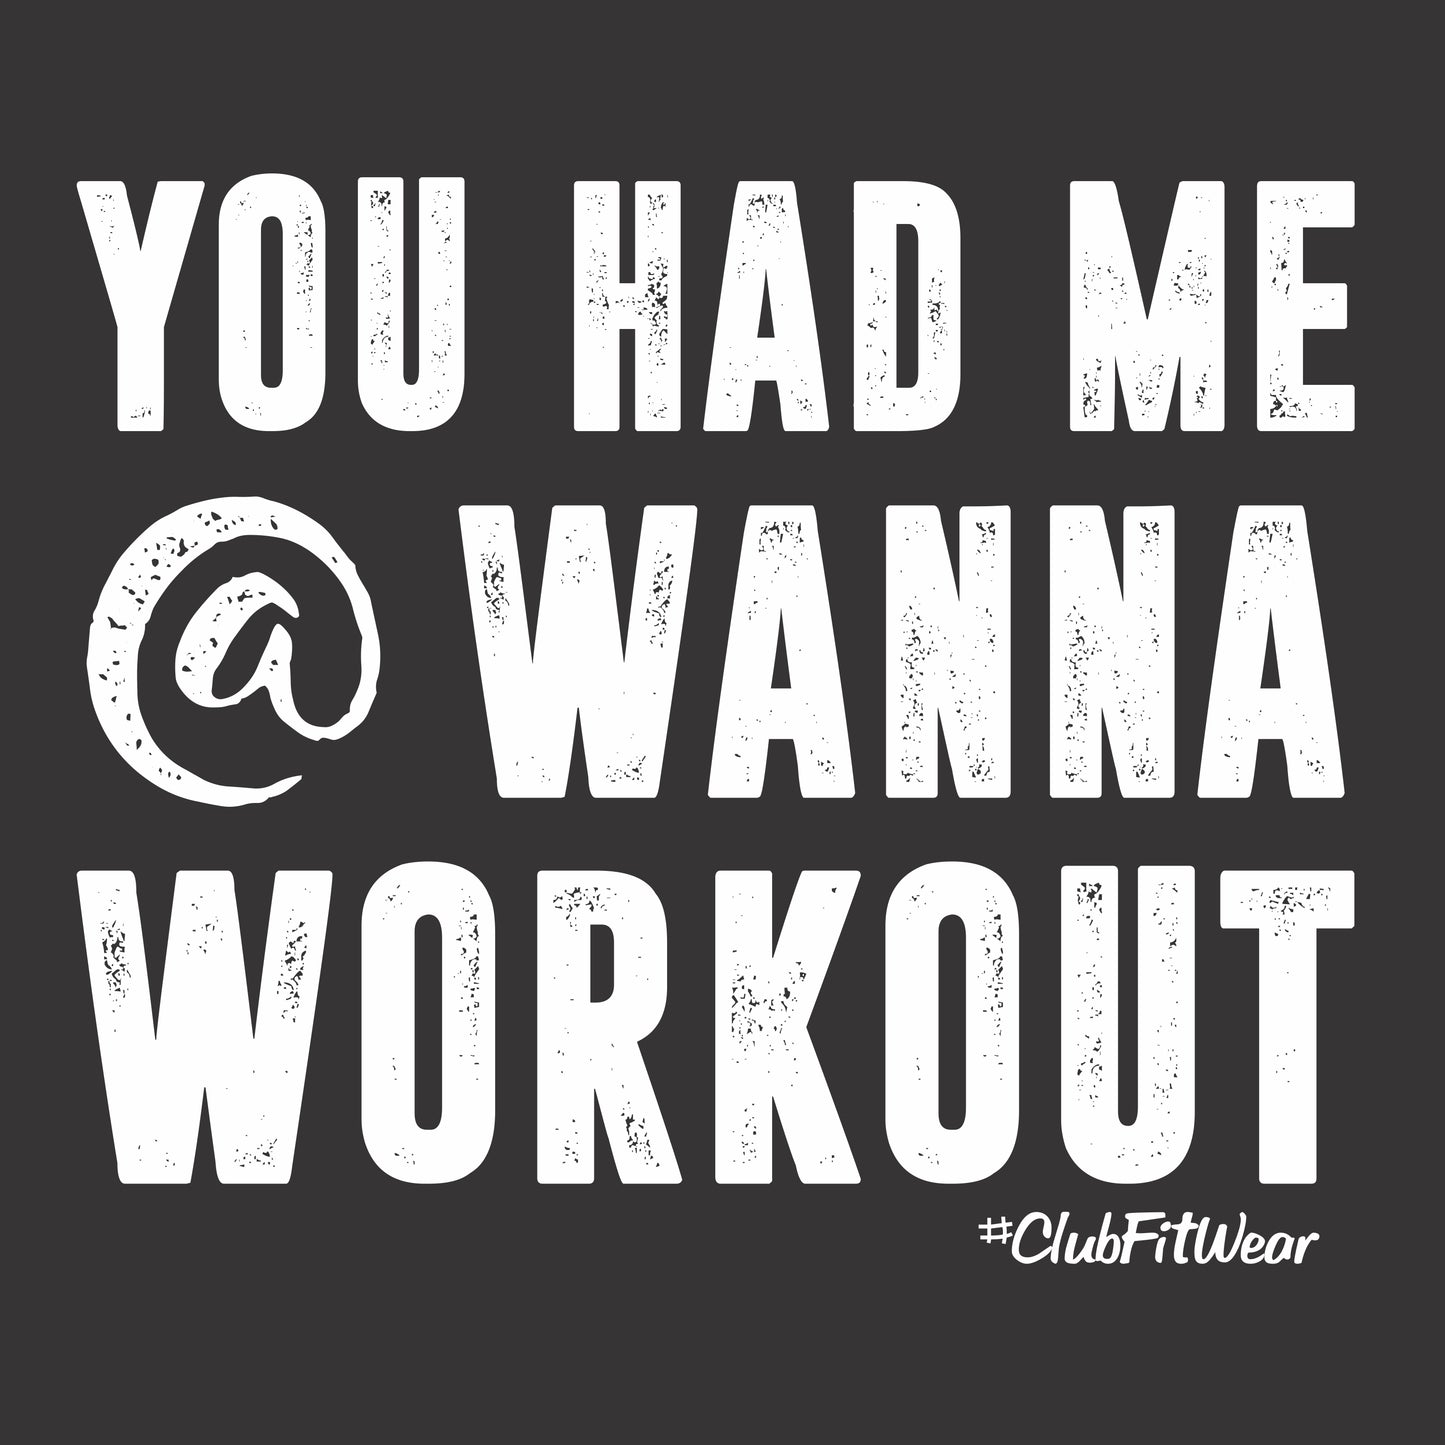 You had me at Wanna Workout